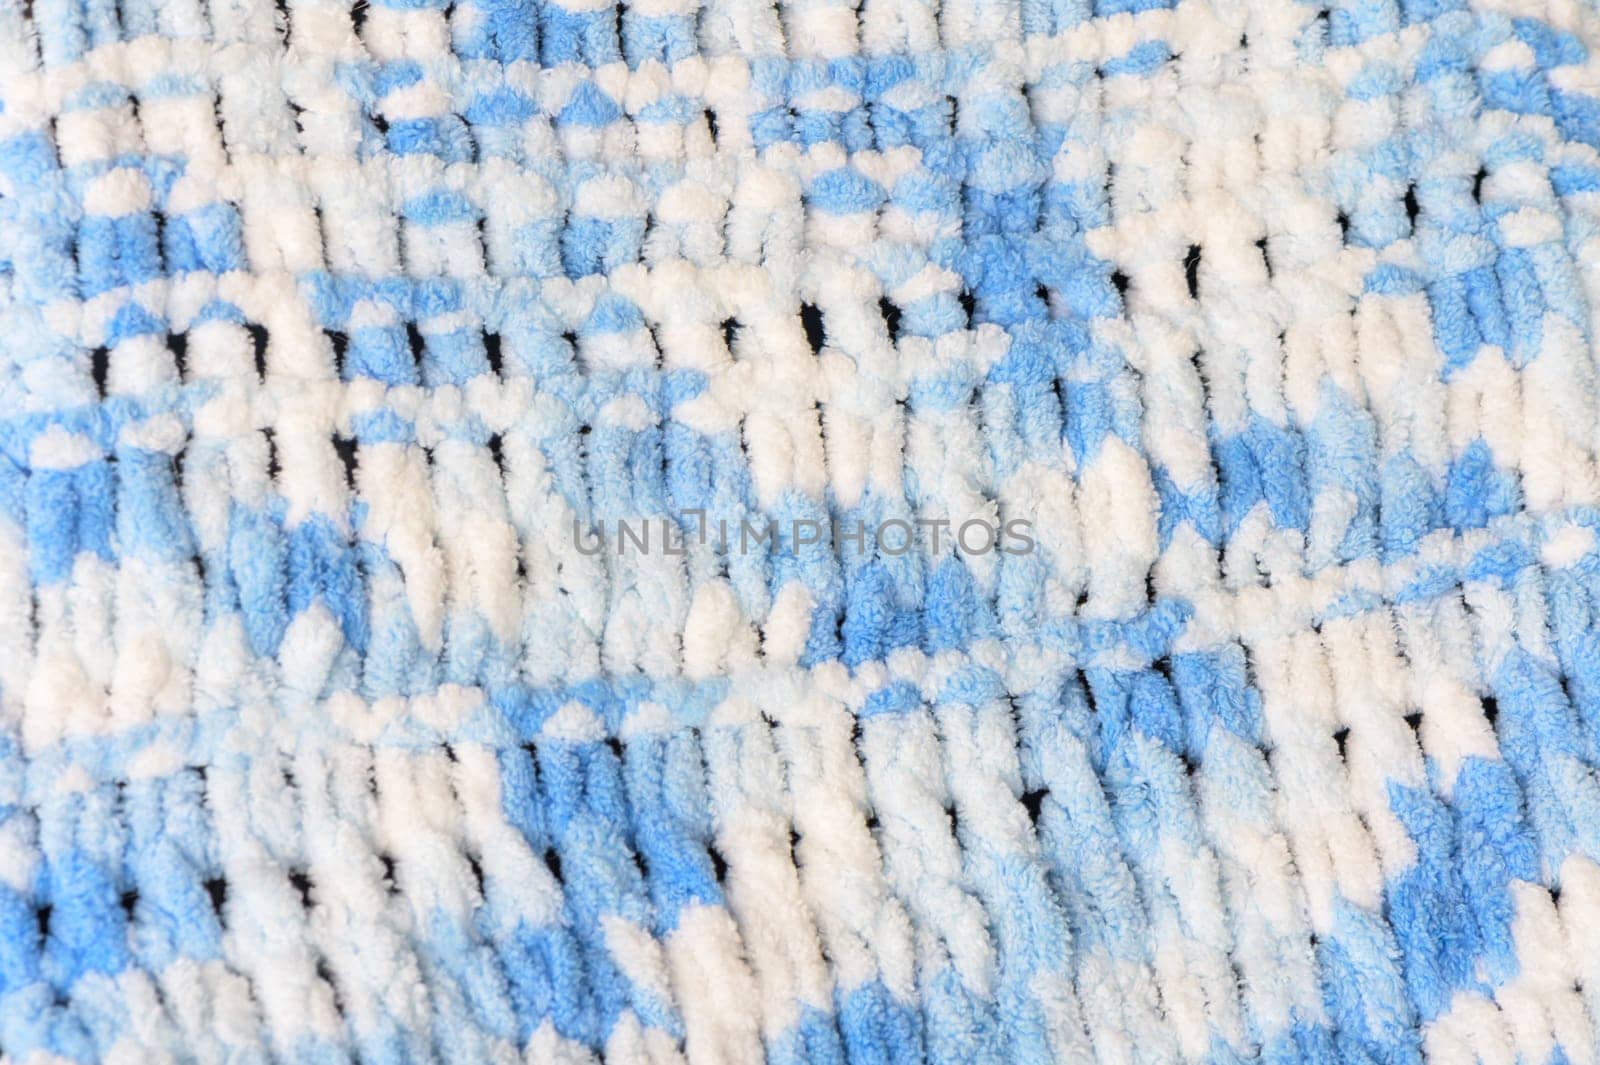 woolen blanket as a background in the photo 2